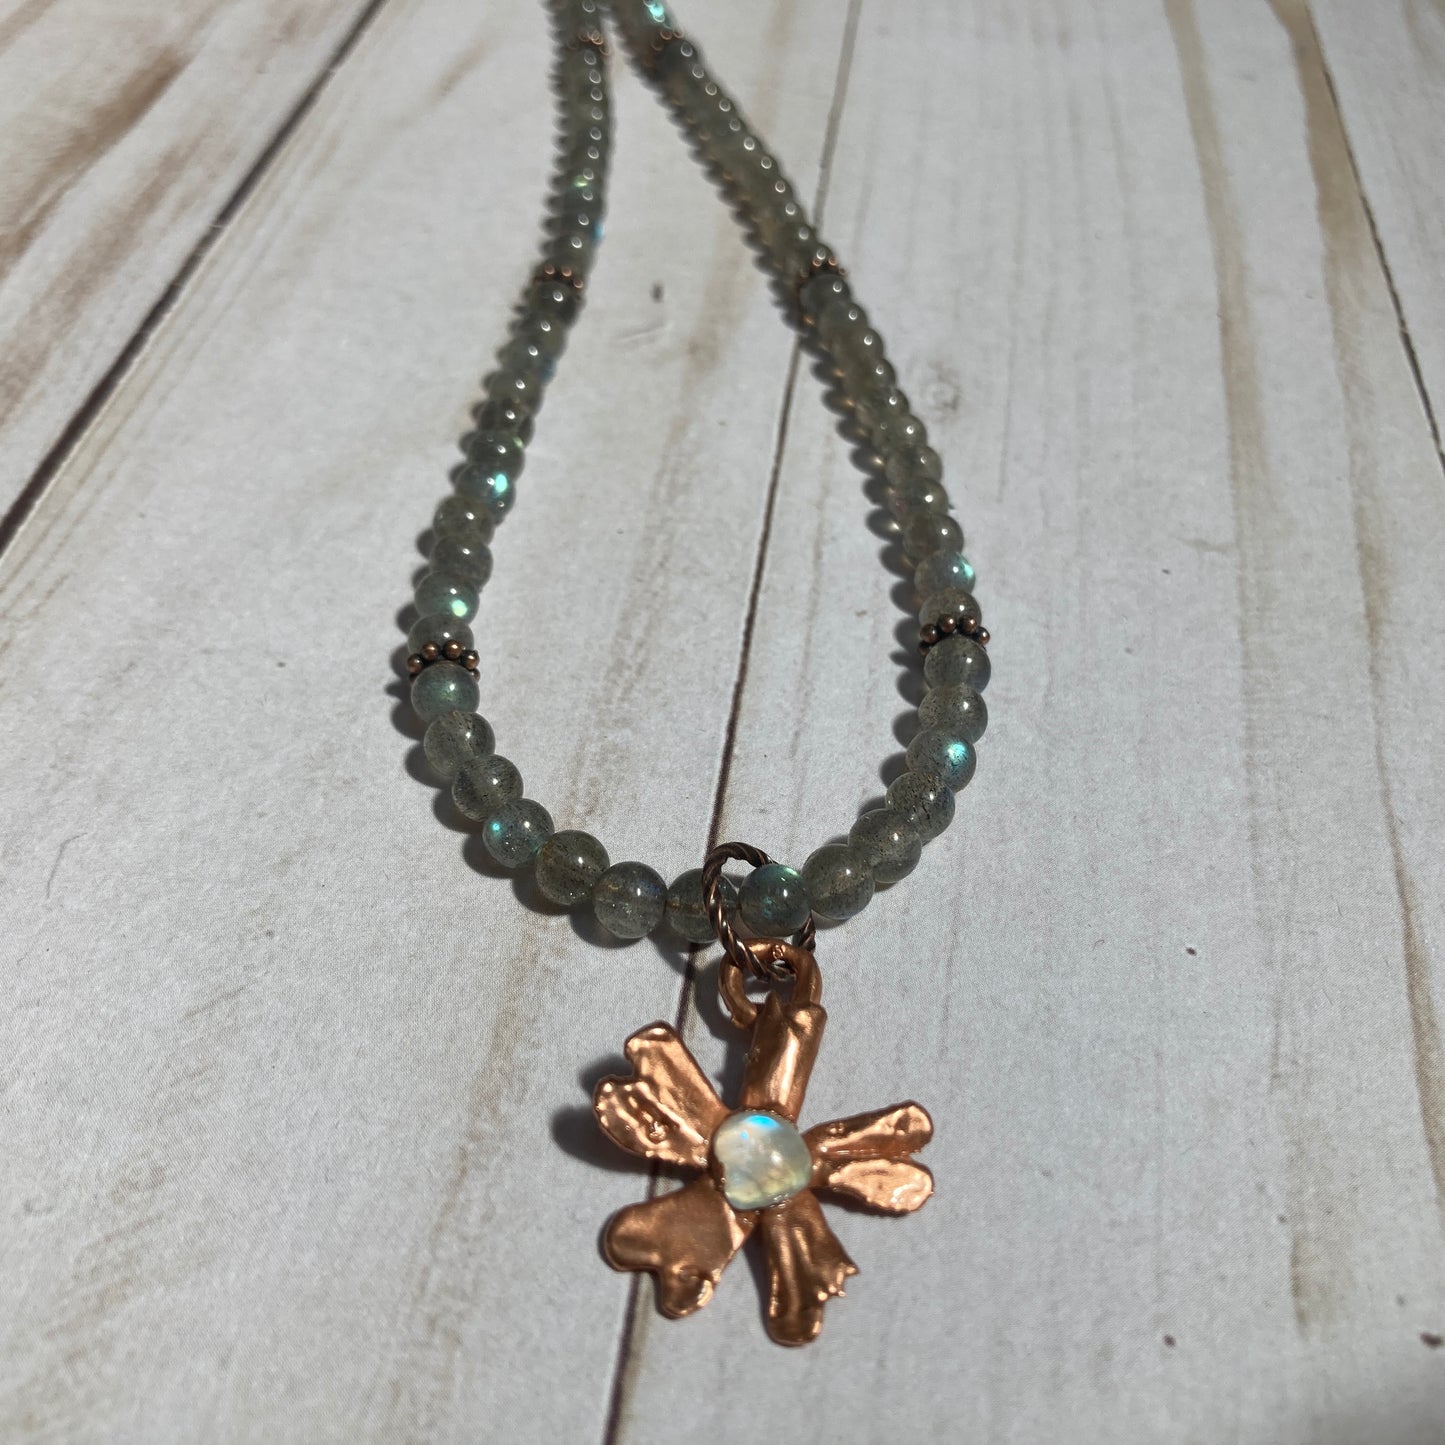 Labradorite Necklace with Moonstone Studded Copper Flower Charm